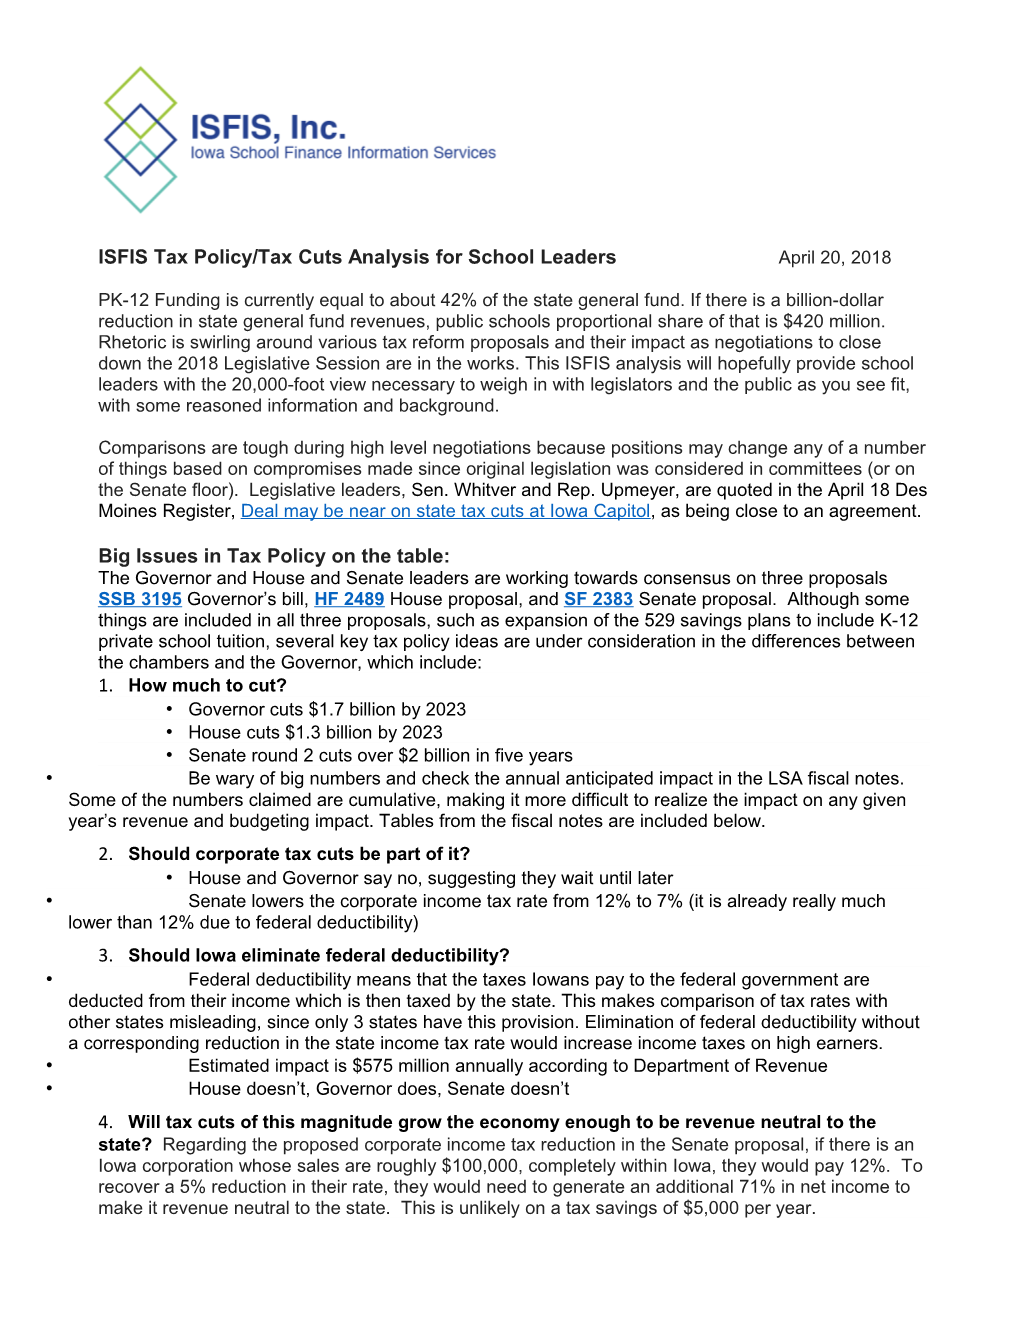 ISFIS Tax Policy/Tax Cuts Analysis for School Leaders April 20, 2018